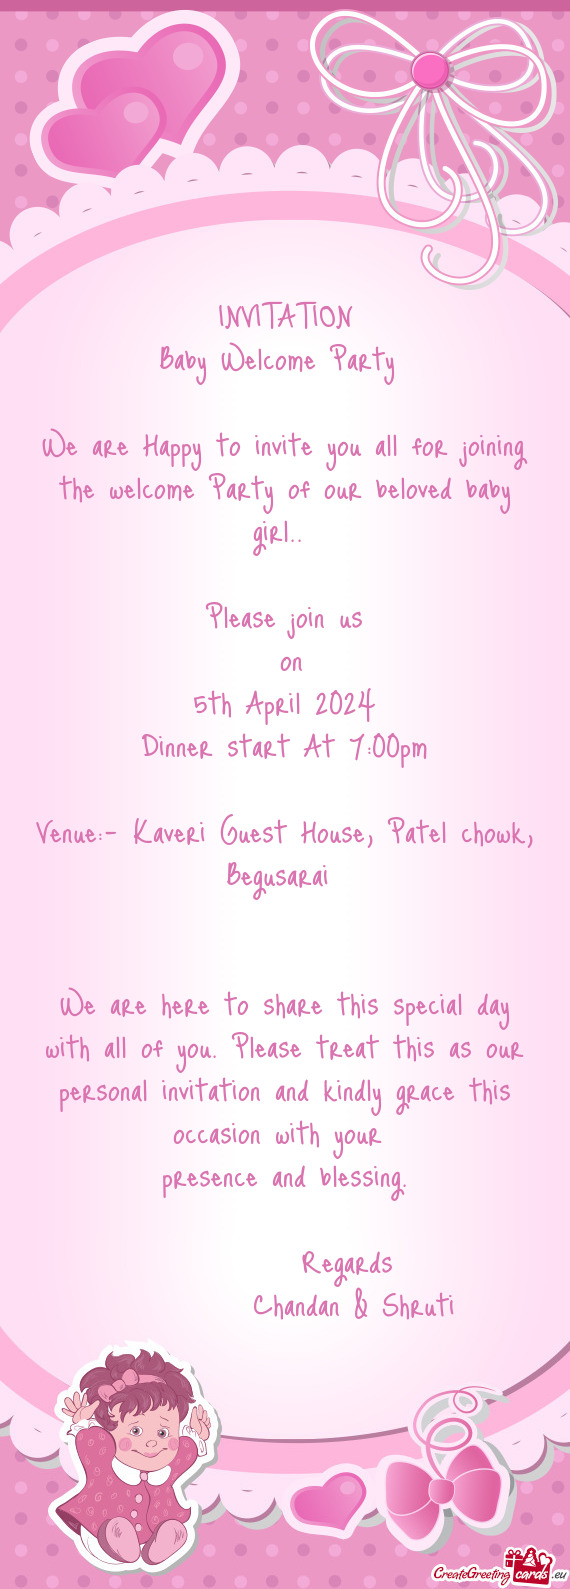 We are Happy to invite you all for joining the welcome Party of our beloved baby girl